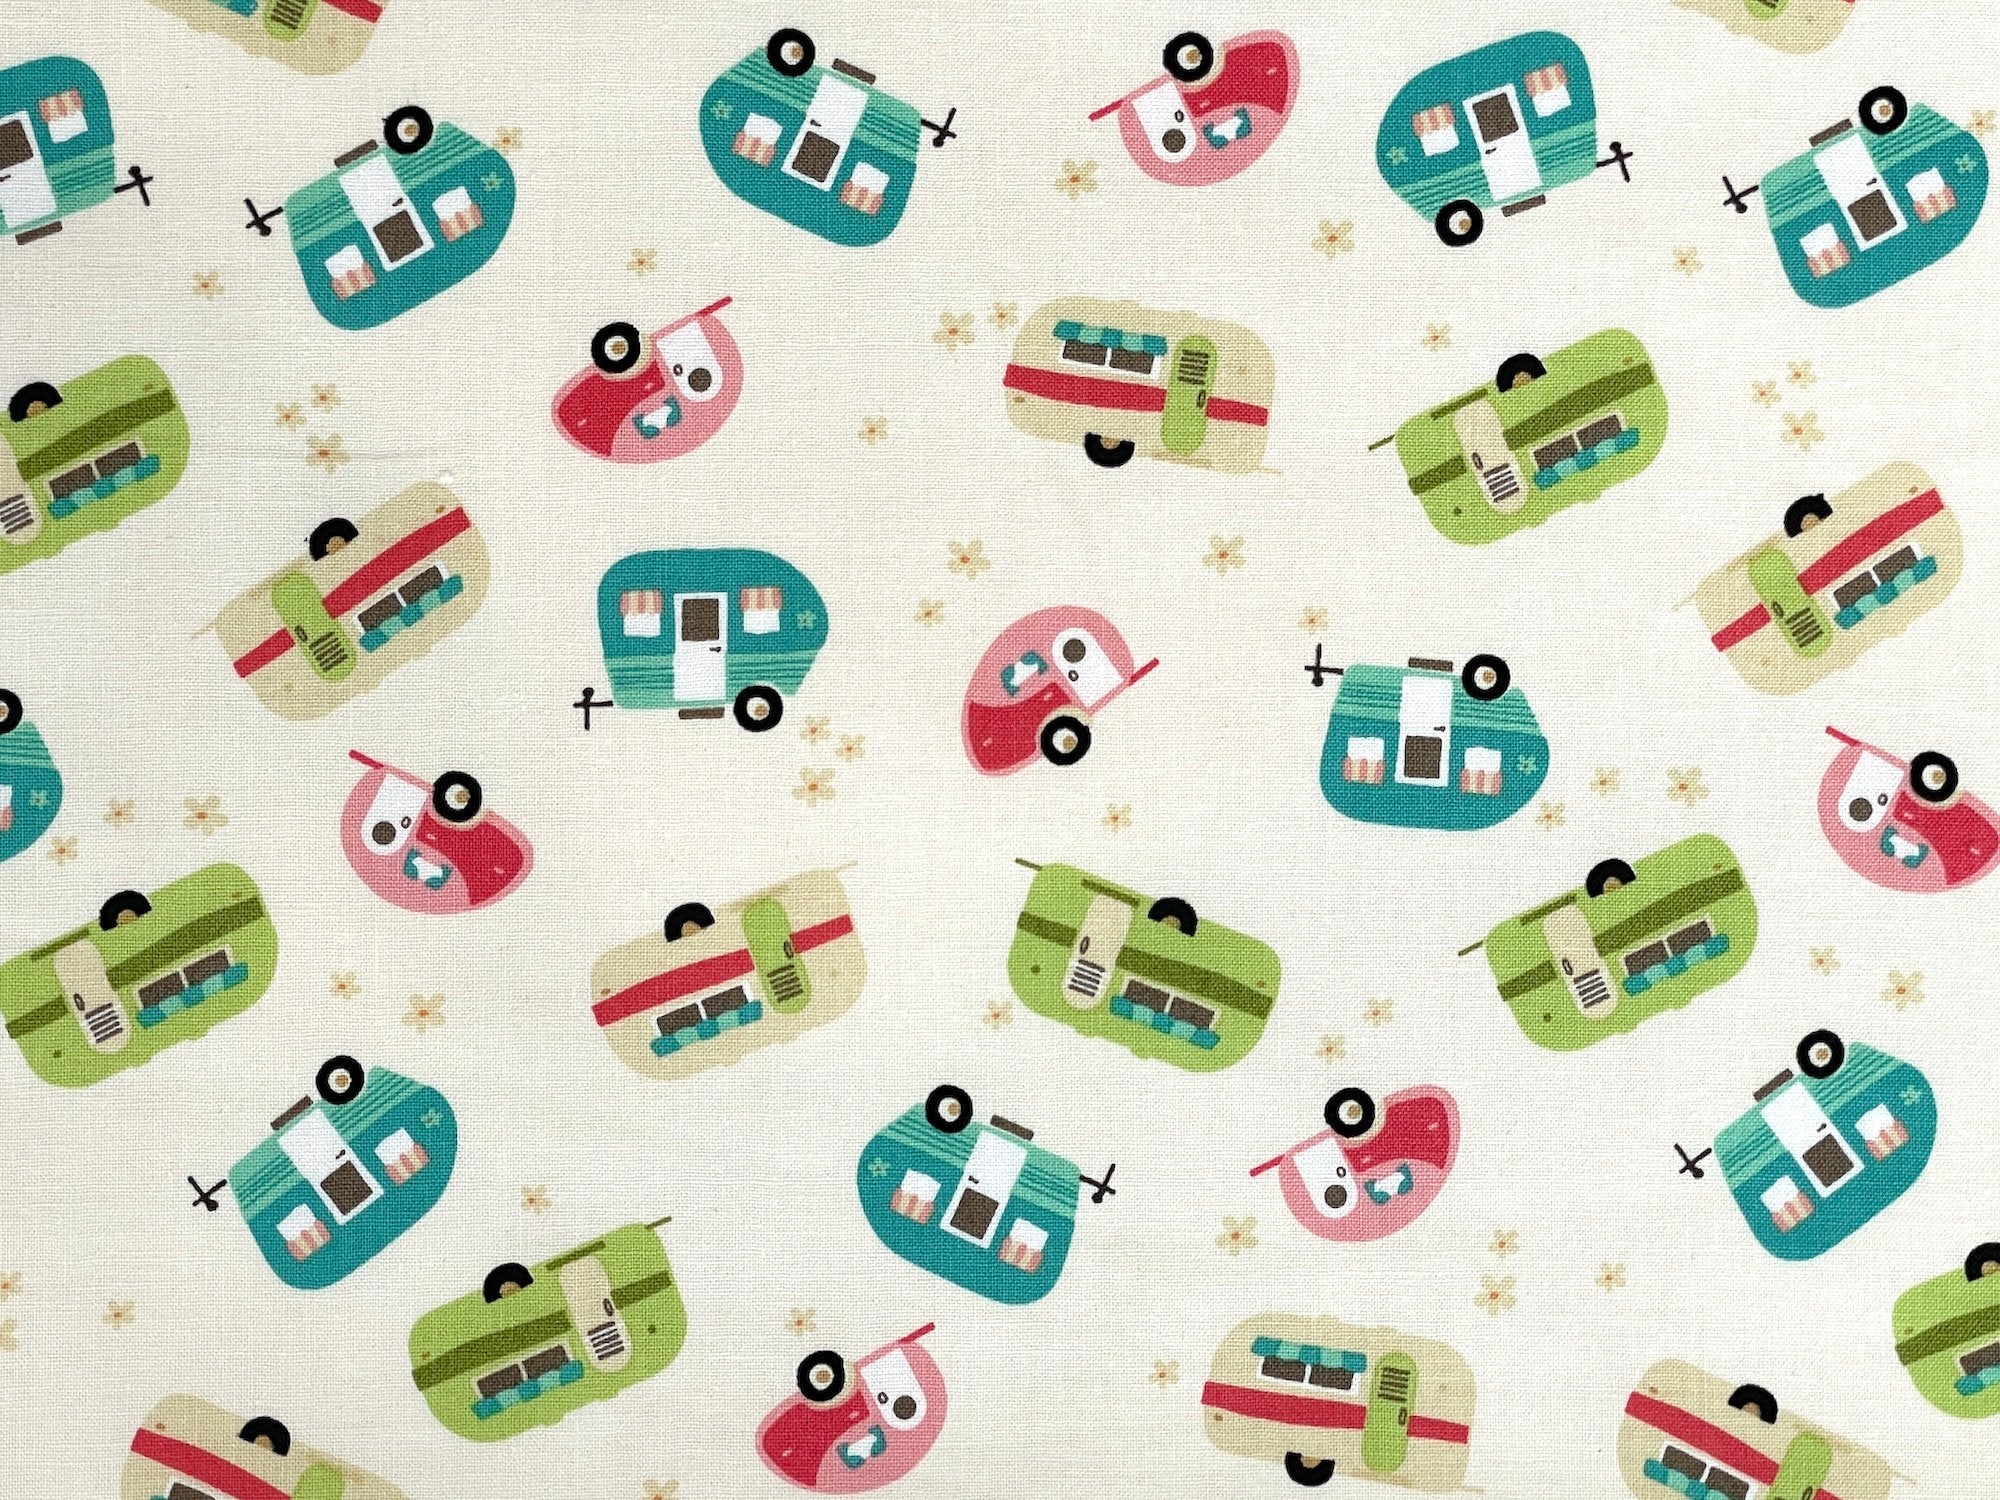 This fabric is called Glamp Camp Travel Trailers. Travel trailers in shades of green, turquoise, tan and pink are tossed over a cream background